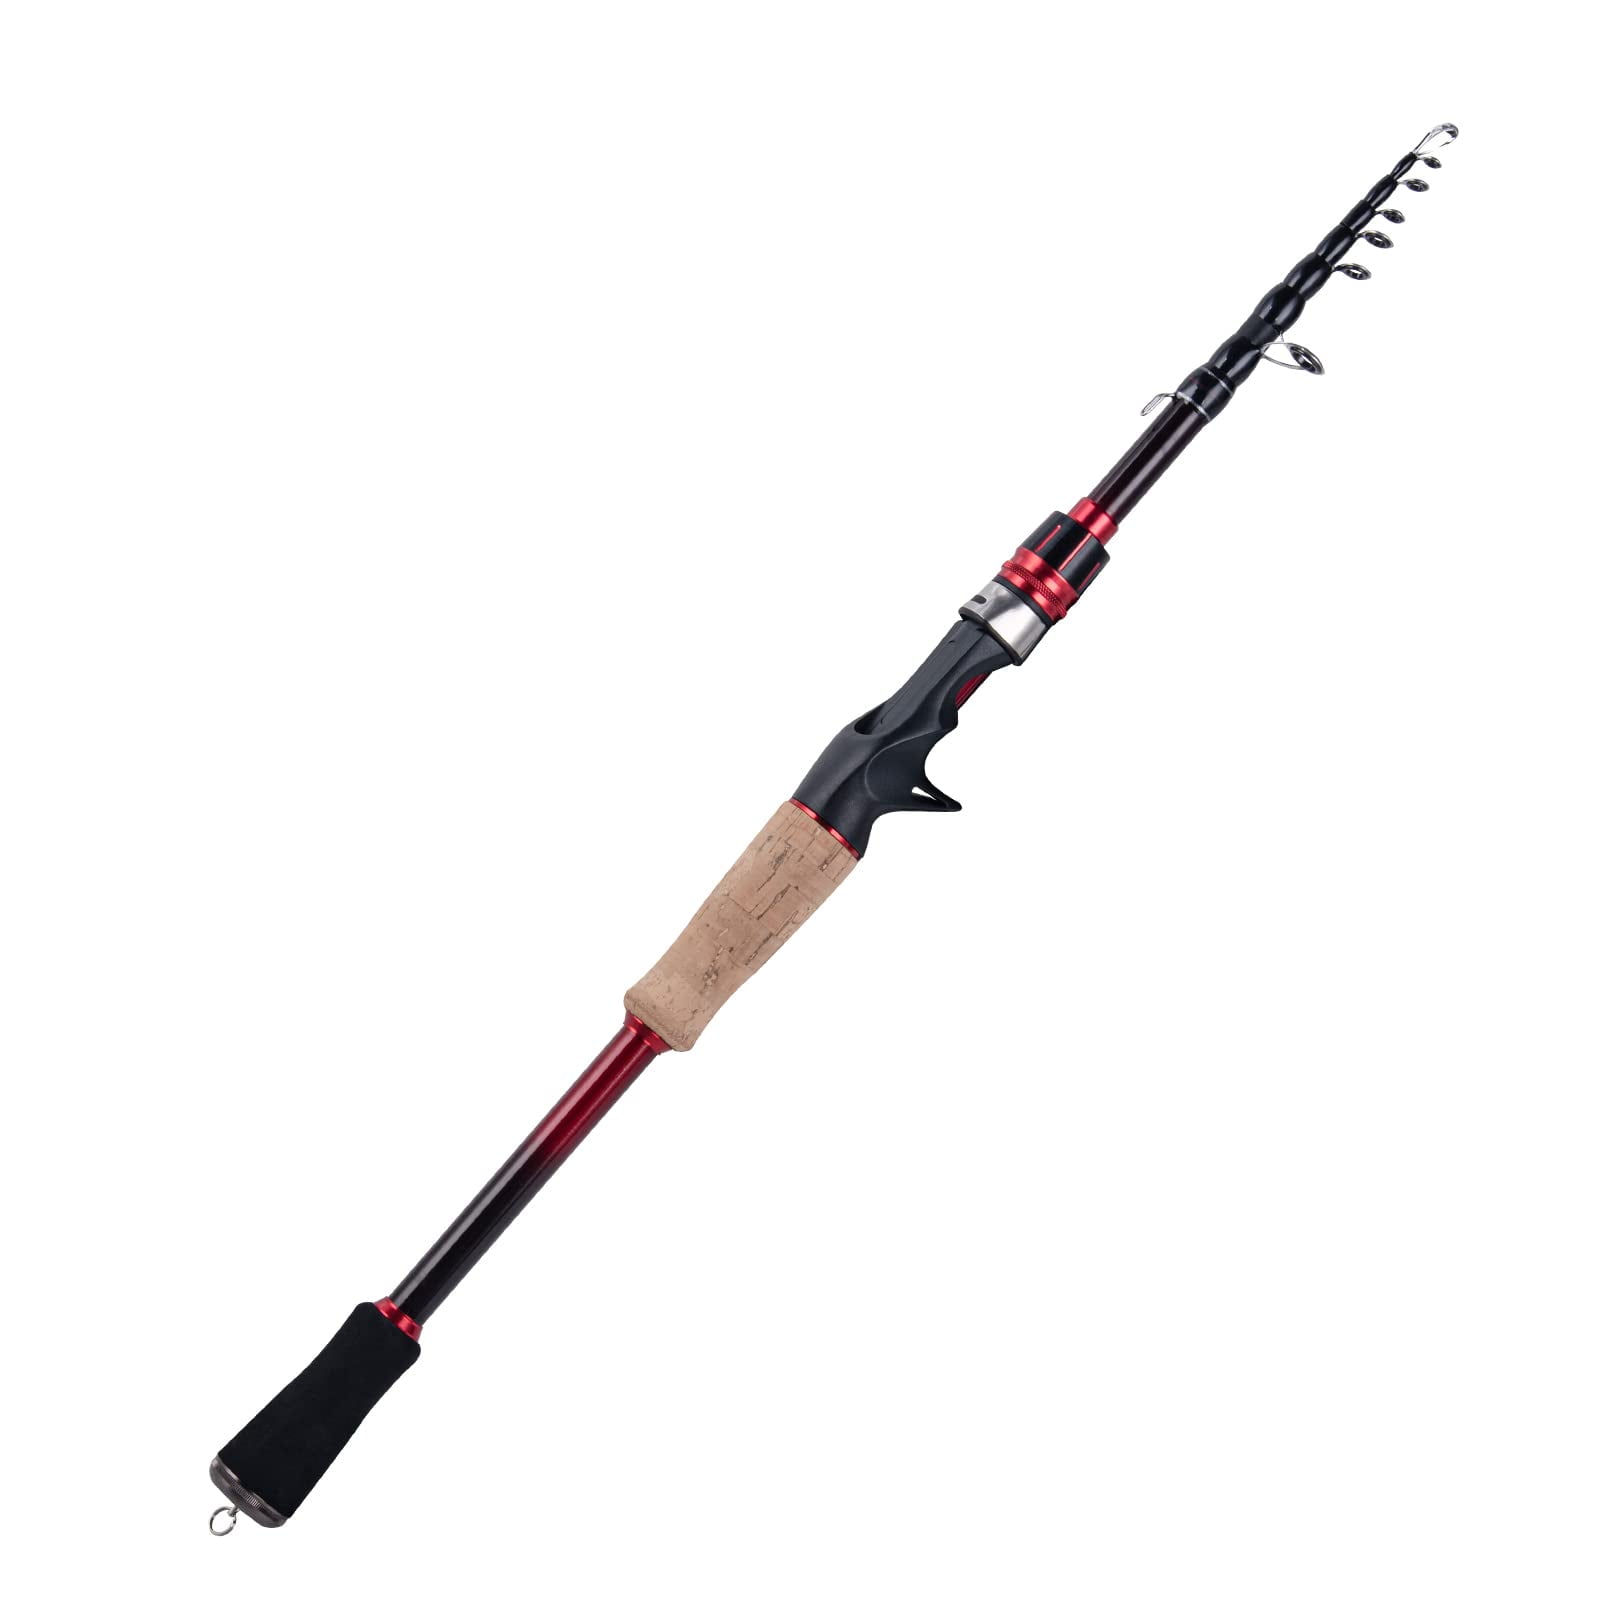  Goture Telescopic Fishing Rod, Fishing Pole with 24Ton Carbon  Fibre, Packs to Just 17.7 in Length, Lightweight & Portable Fishing Pole :  Sports & Outdoors